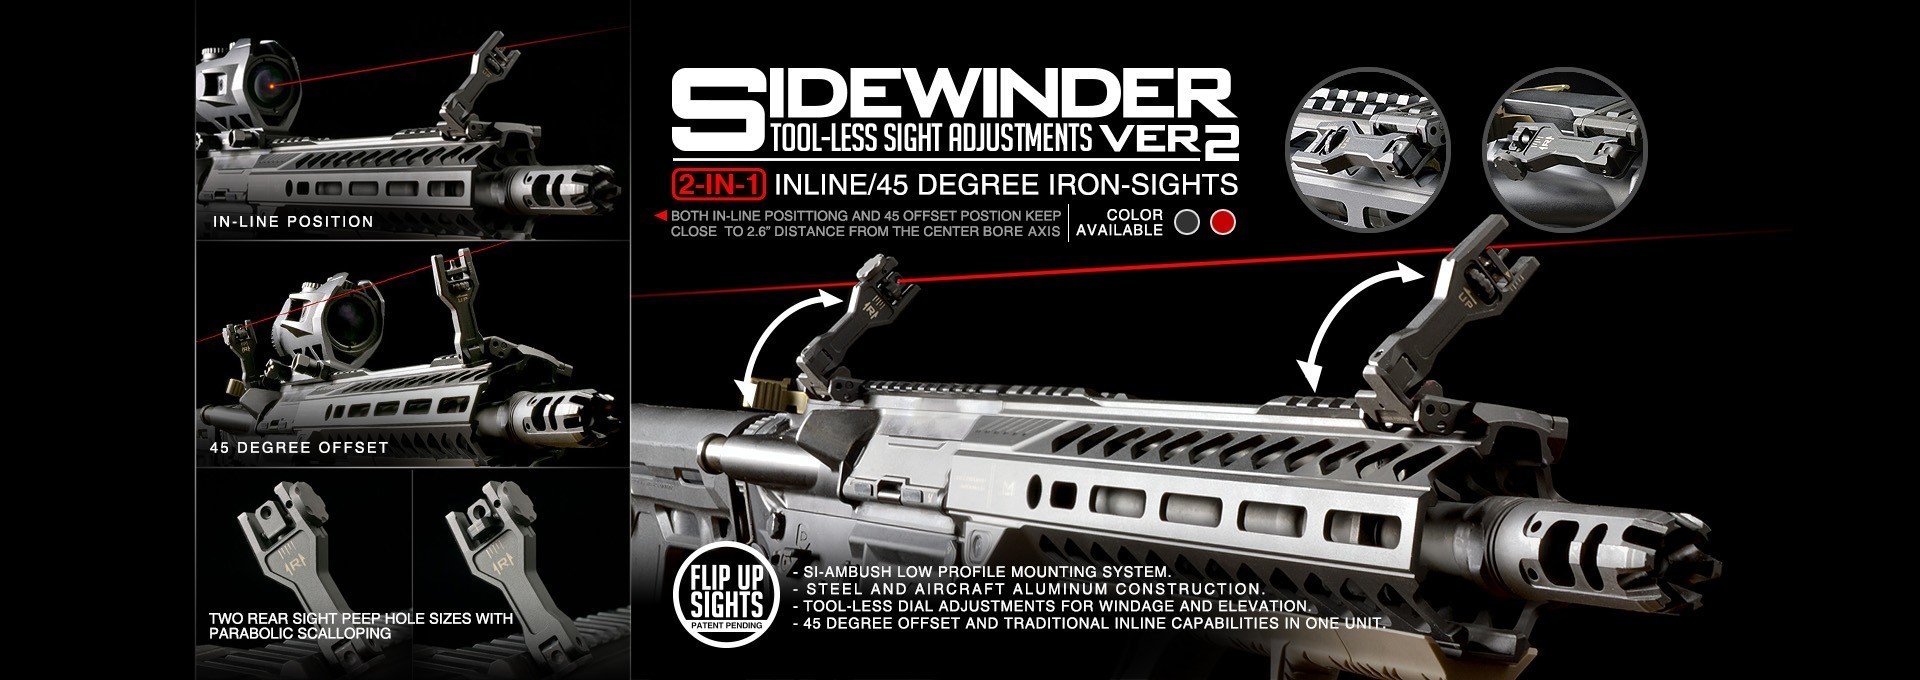 Strike Industries Sidewinder II 45-Degree Offset / Inline Back-Up Iron Sight - Black | Redcon1 Tactical